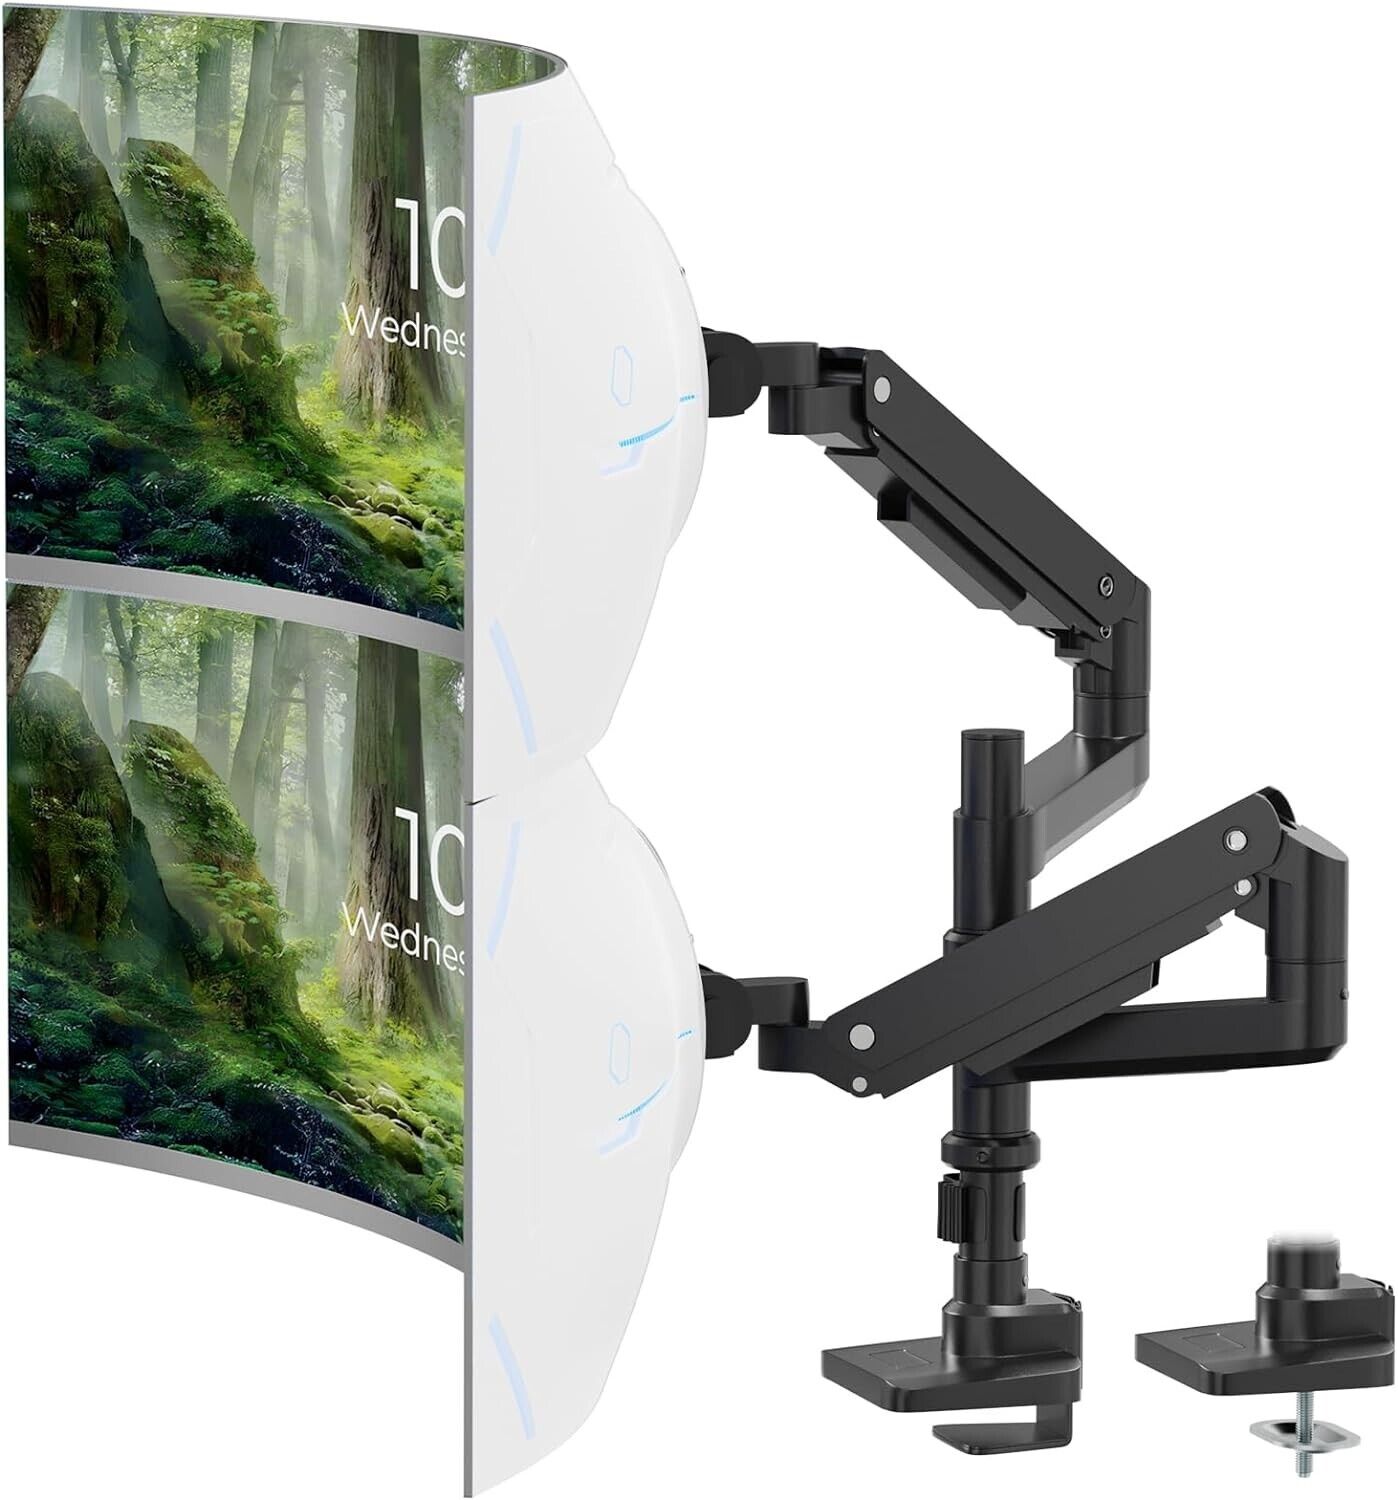 17-49 inch Premium Aluminum Heavy Duty Dual Monitor Arm for Ultrawide Screens up